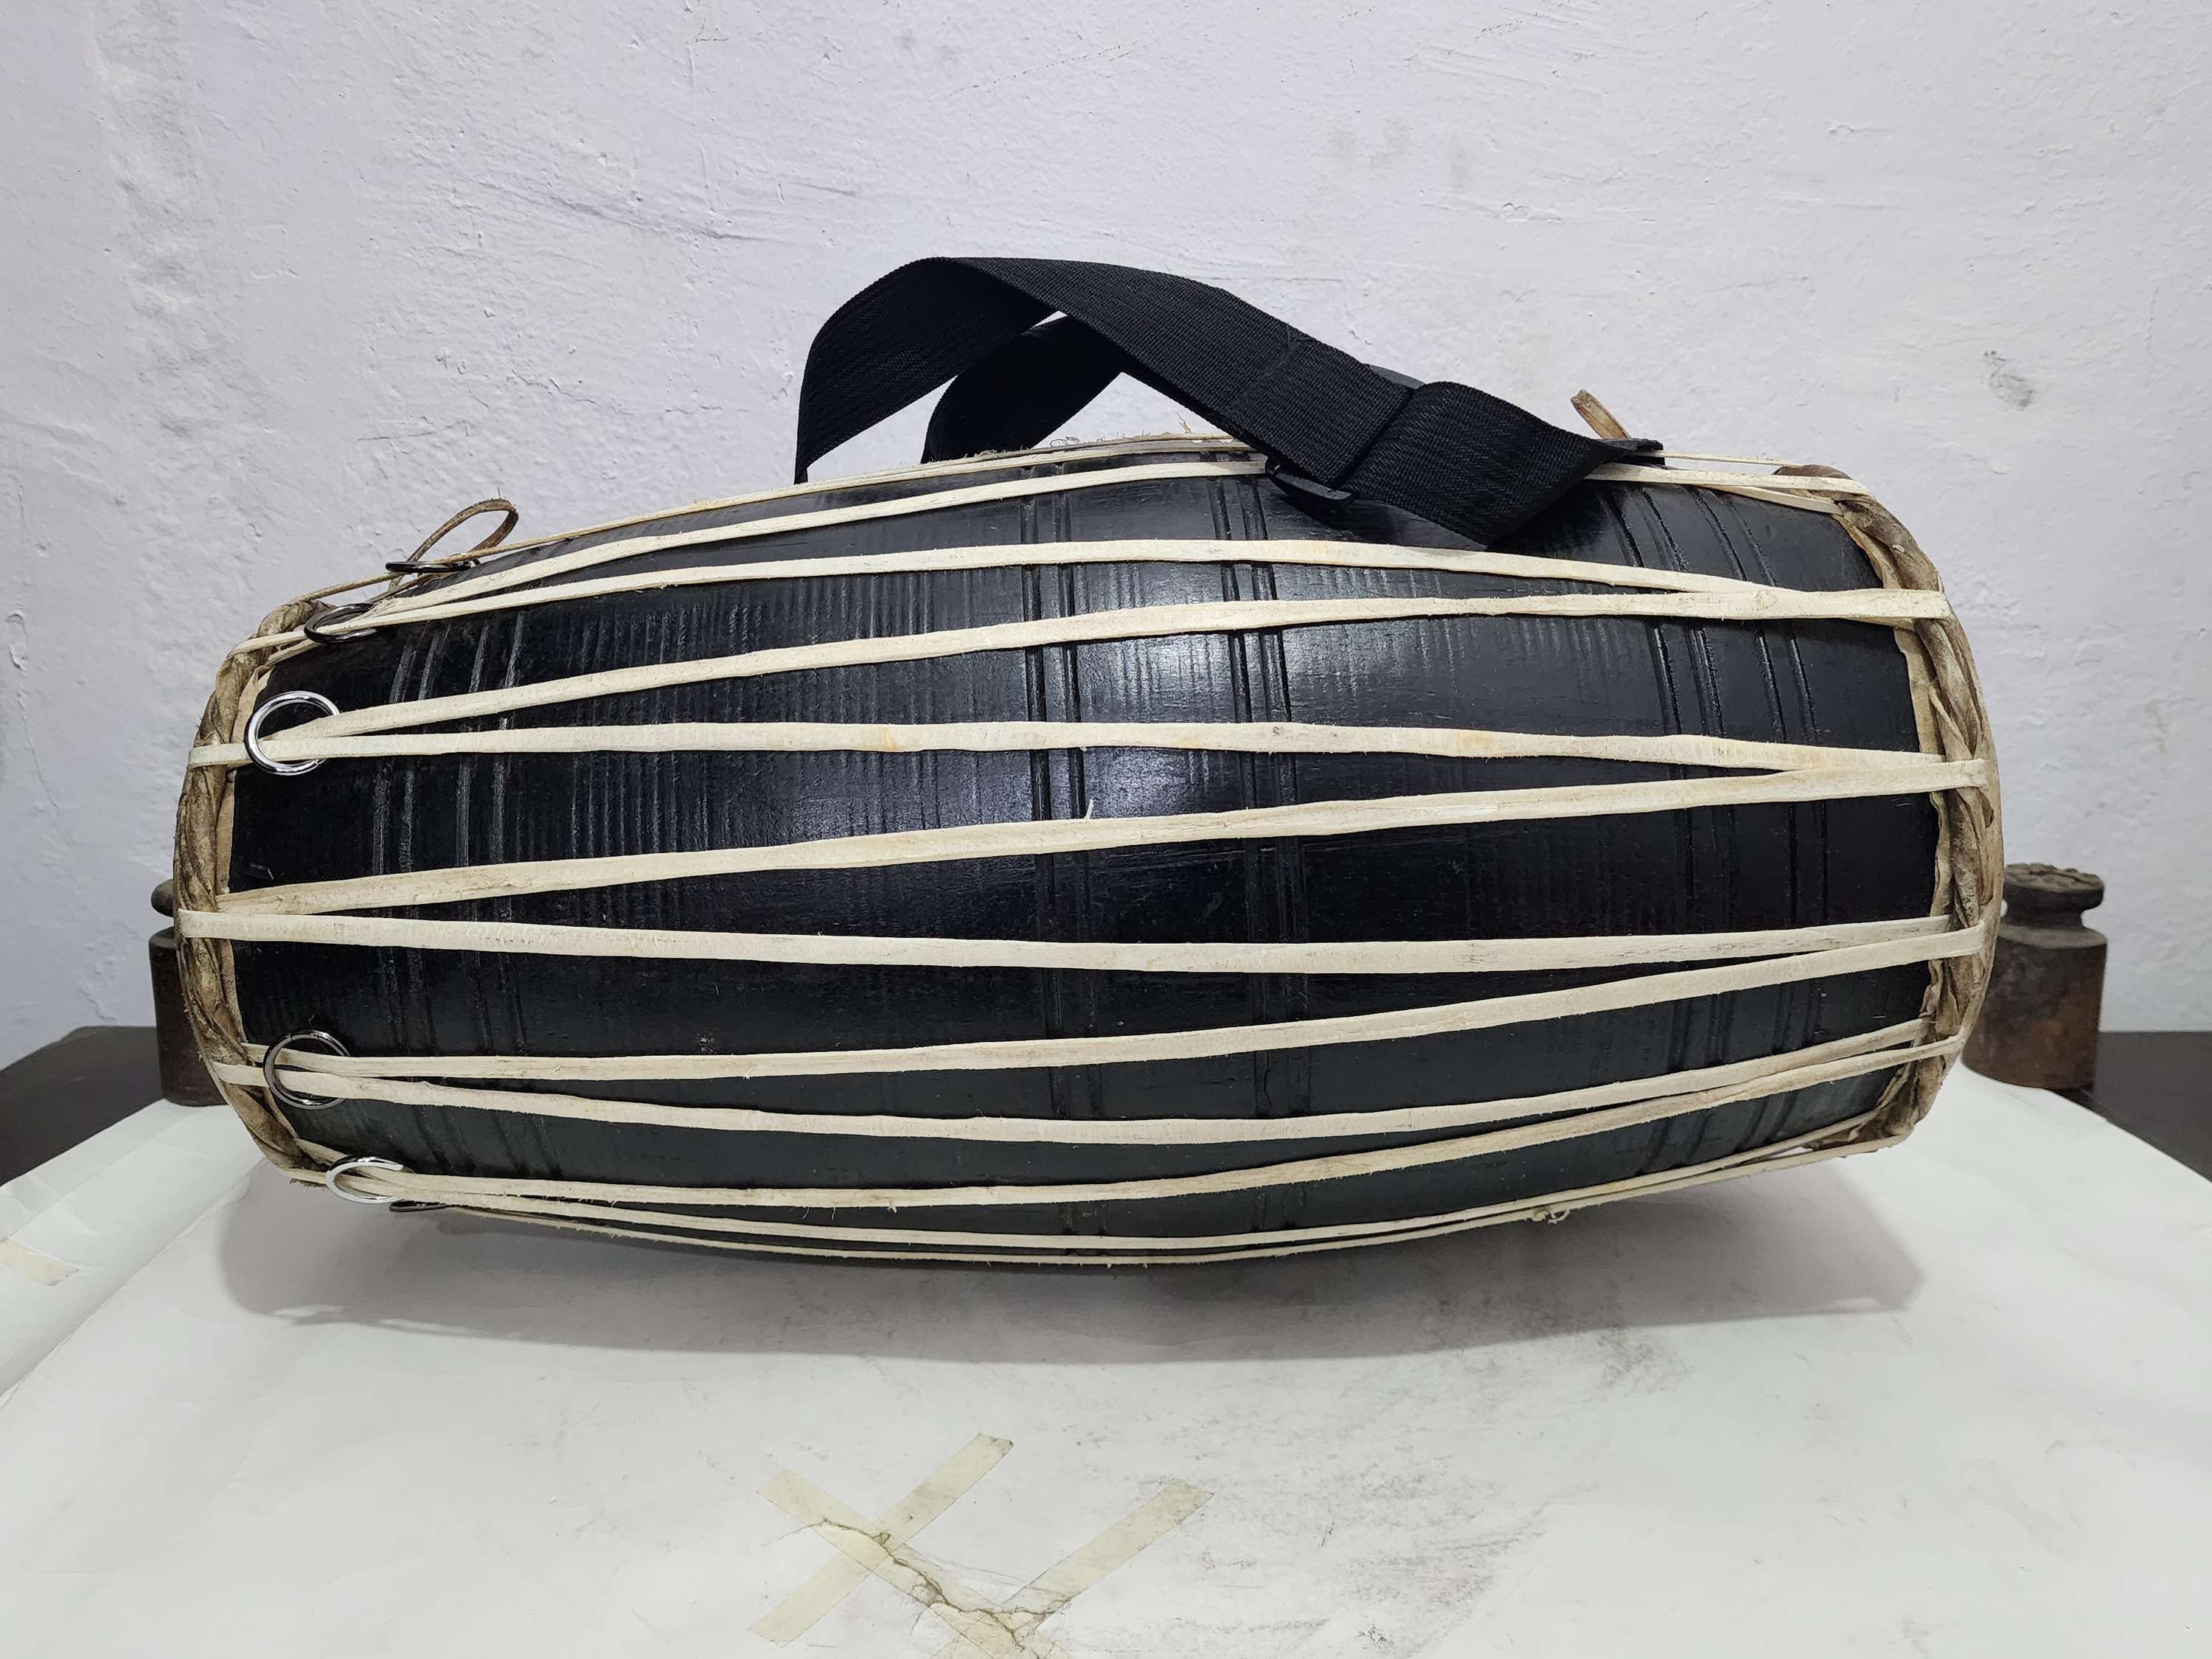 High Quality Nepali Folk Musical Instrument Madal With Bag, professional